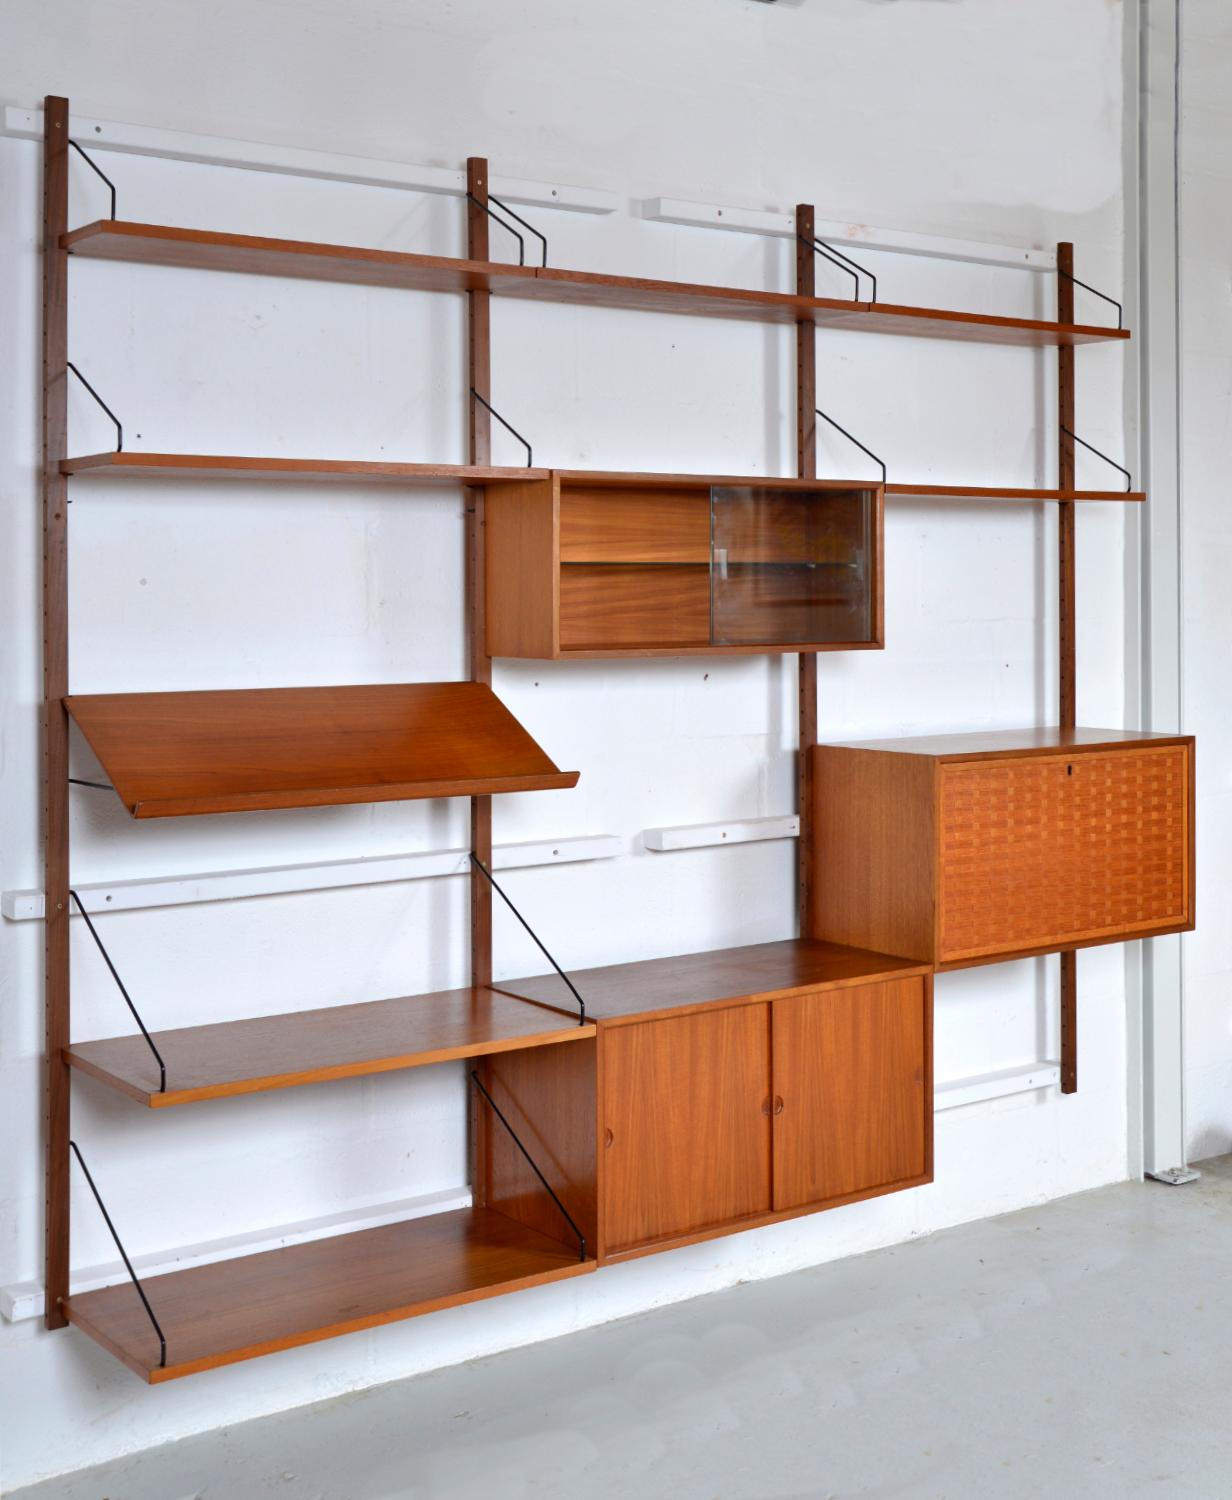 This highly versatile and functional “Royal System” was originally designed by Poul Cadovius in 1948. This three-bay teak shelving system offers a wide variety of storage and display options. The set includes a very attractive basket weave lockable